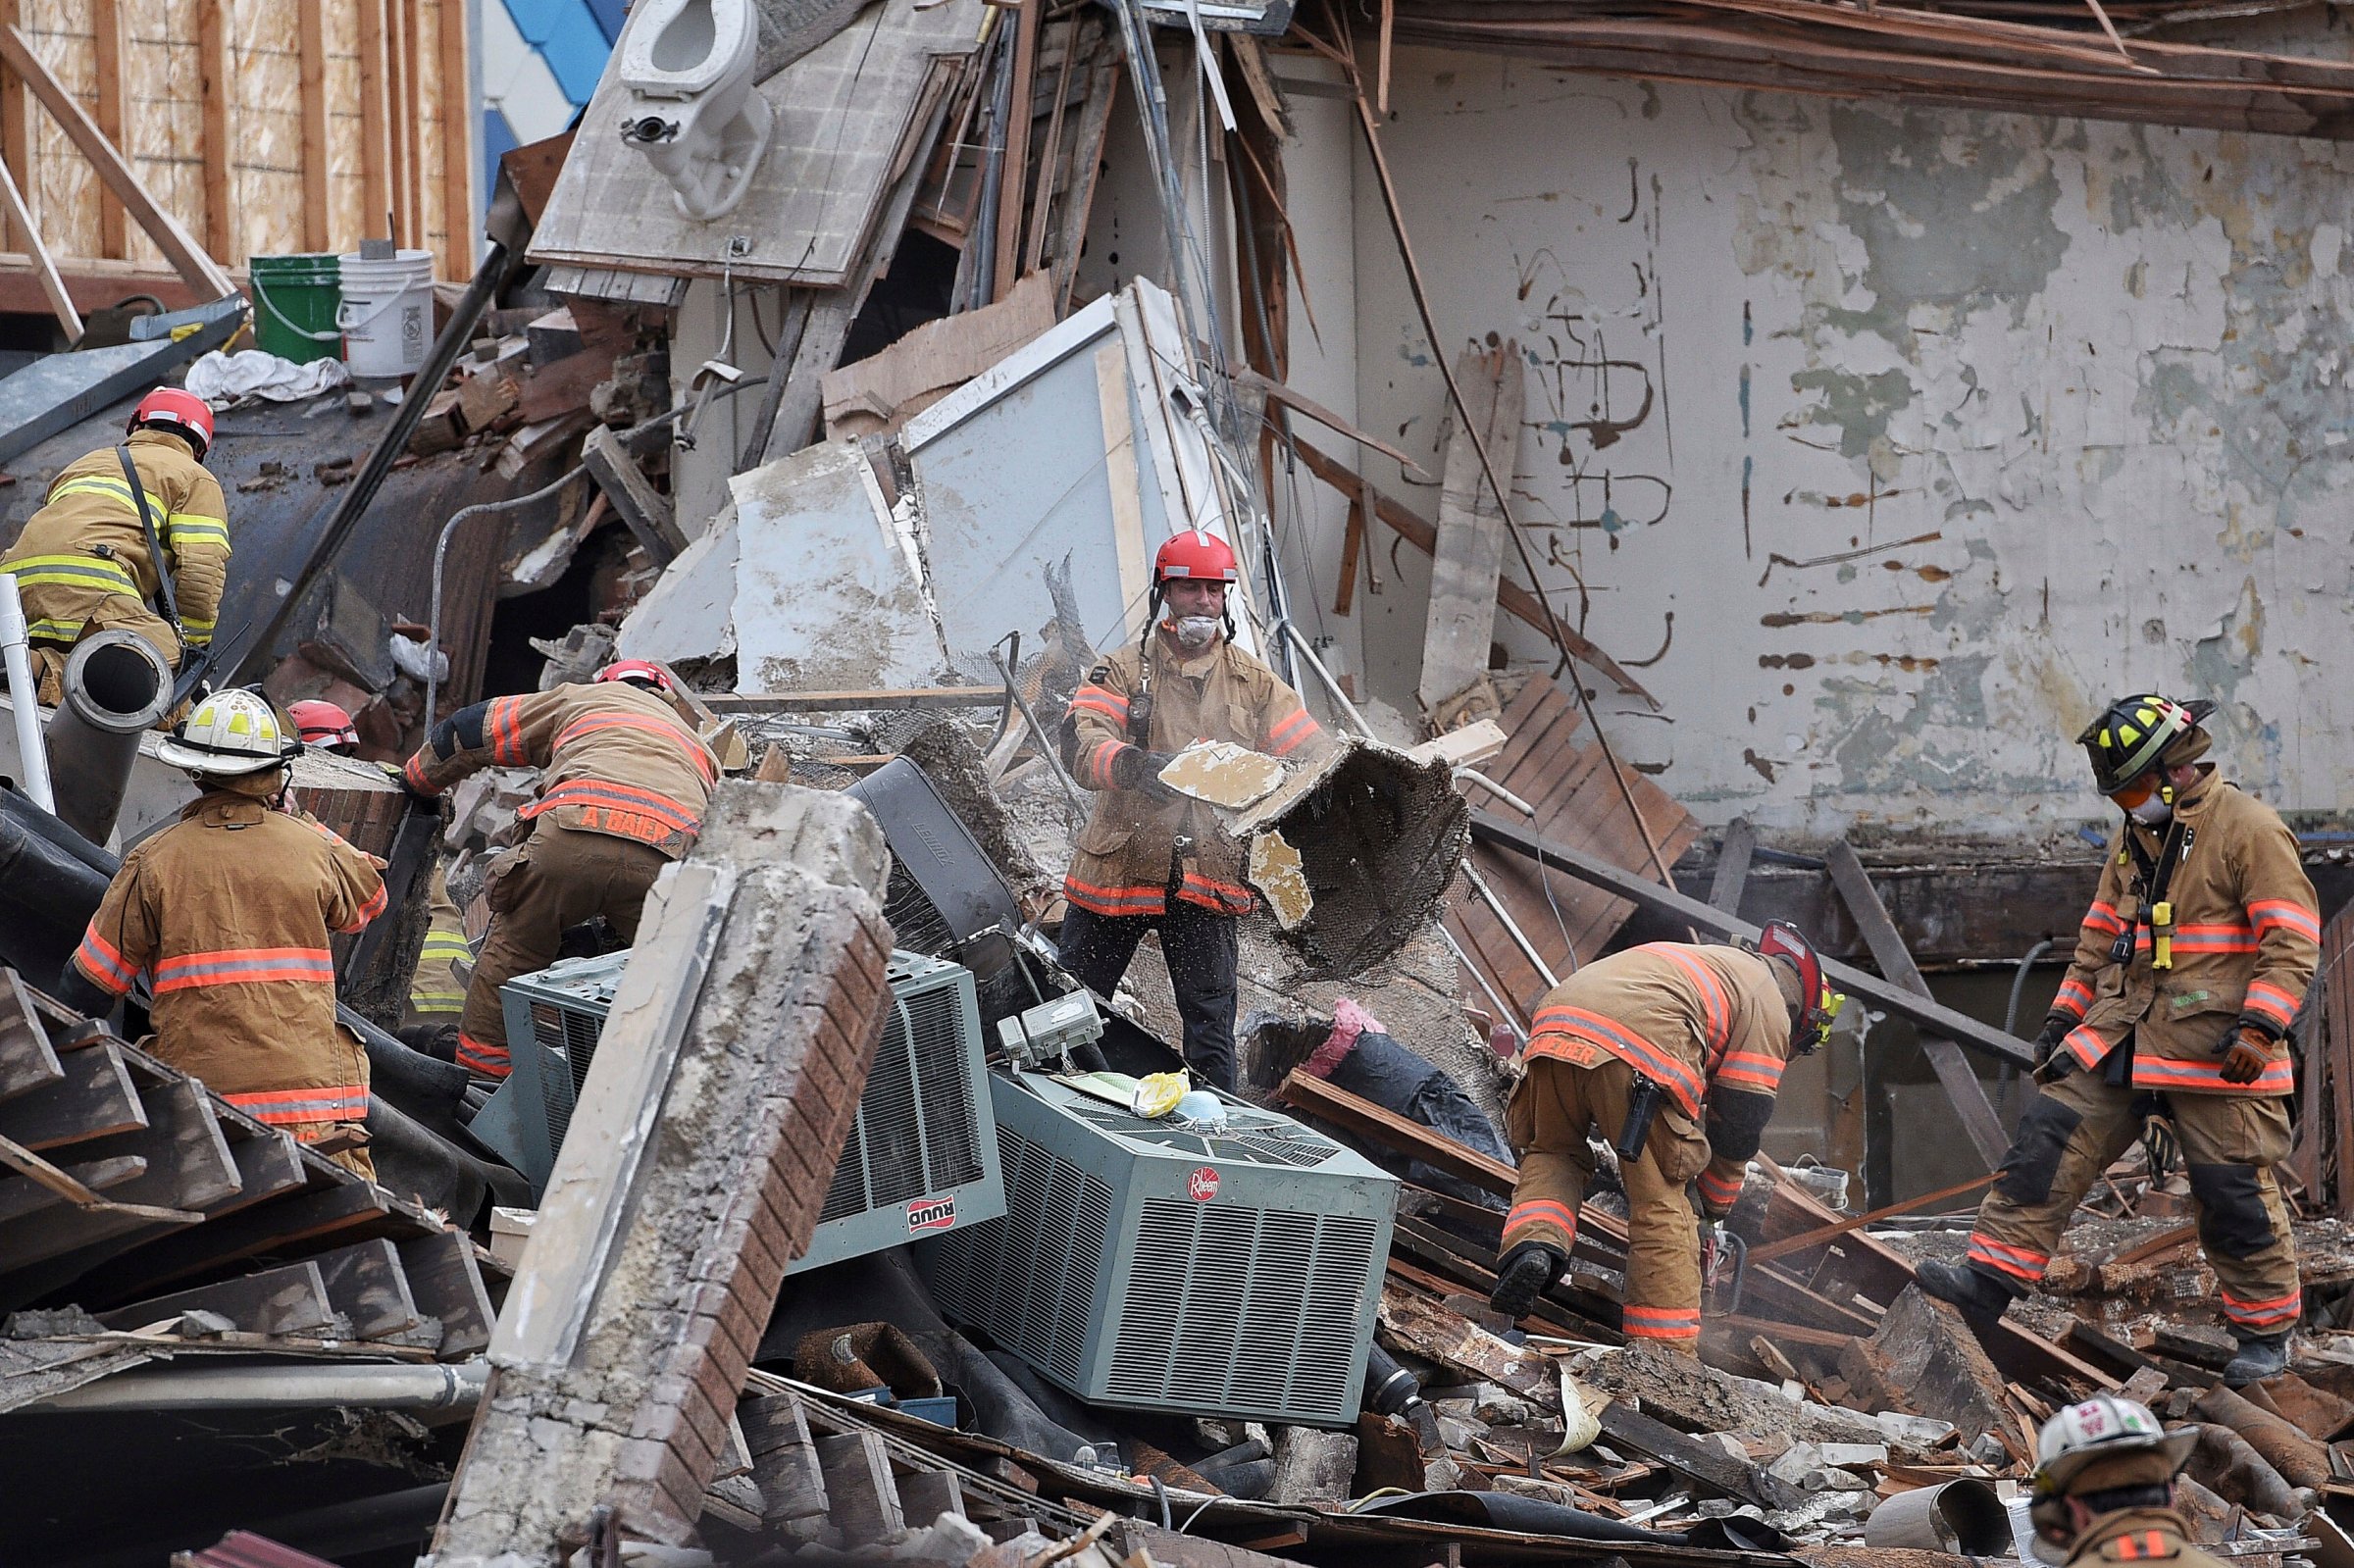 Emergency crews clear debris at the scene of building collapse in Sioux Falls, S.D., Dec. 2, 2016.